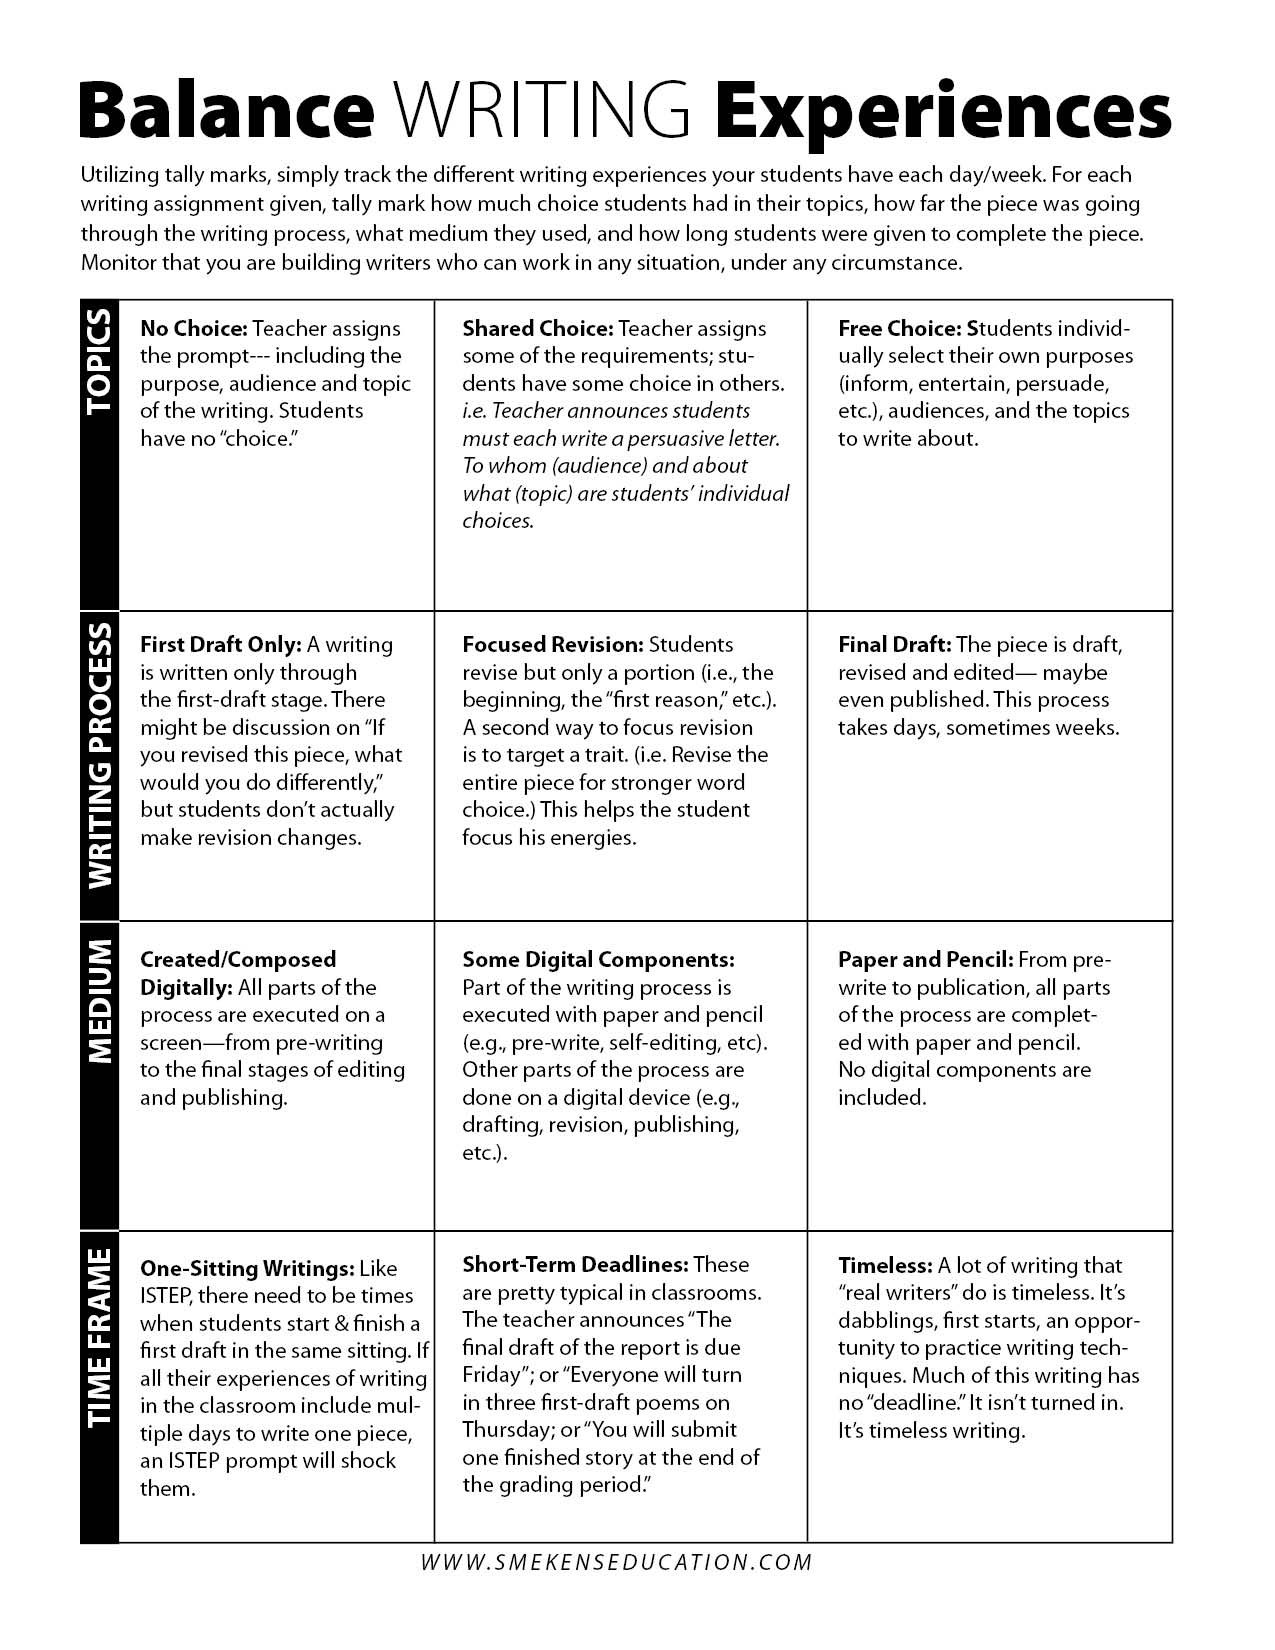 Tracking Student Writing Experiences - Form Explanation